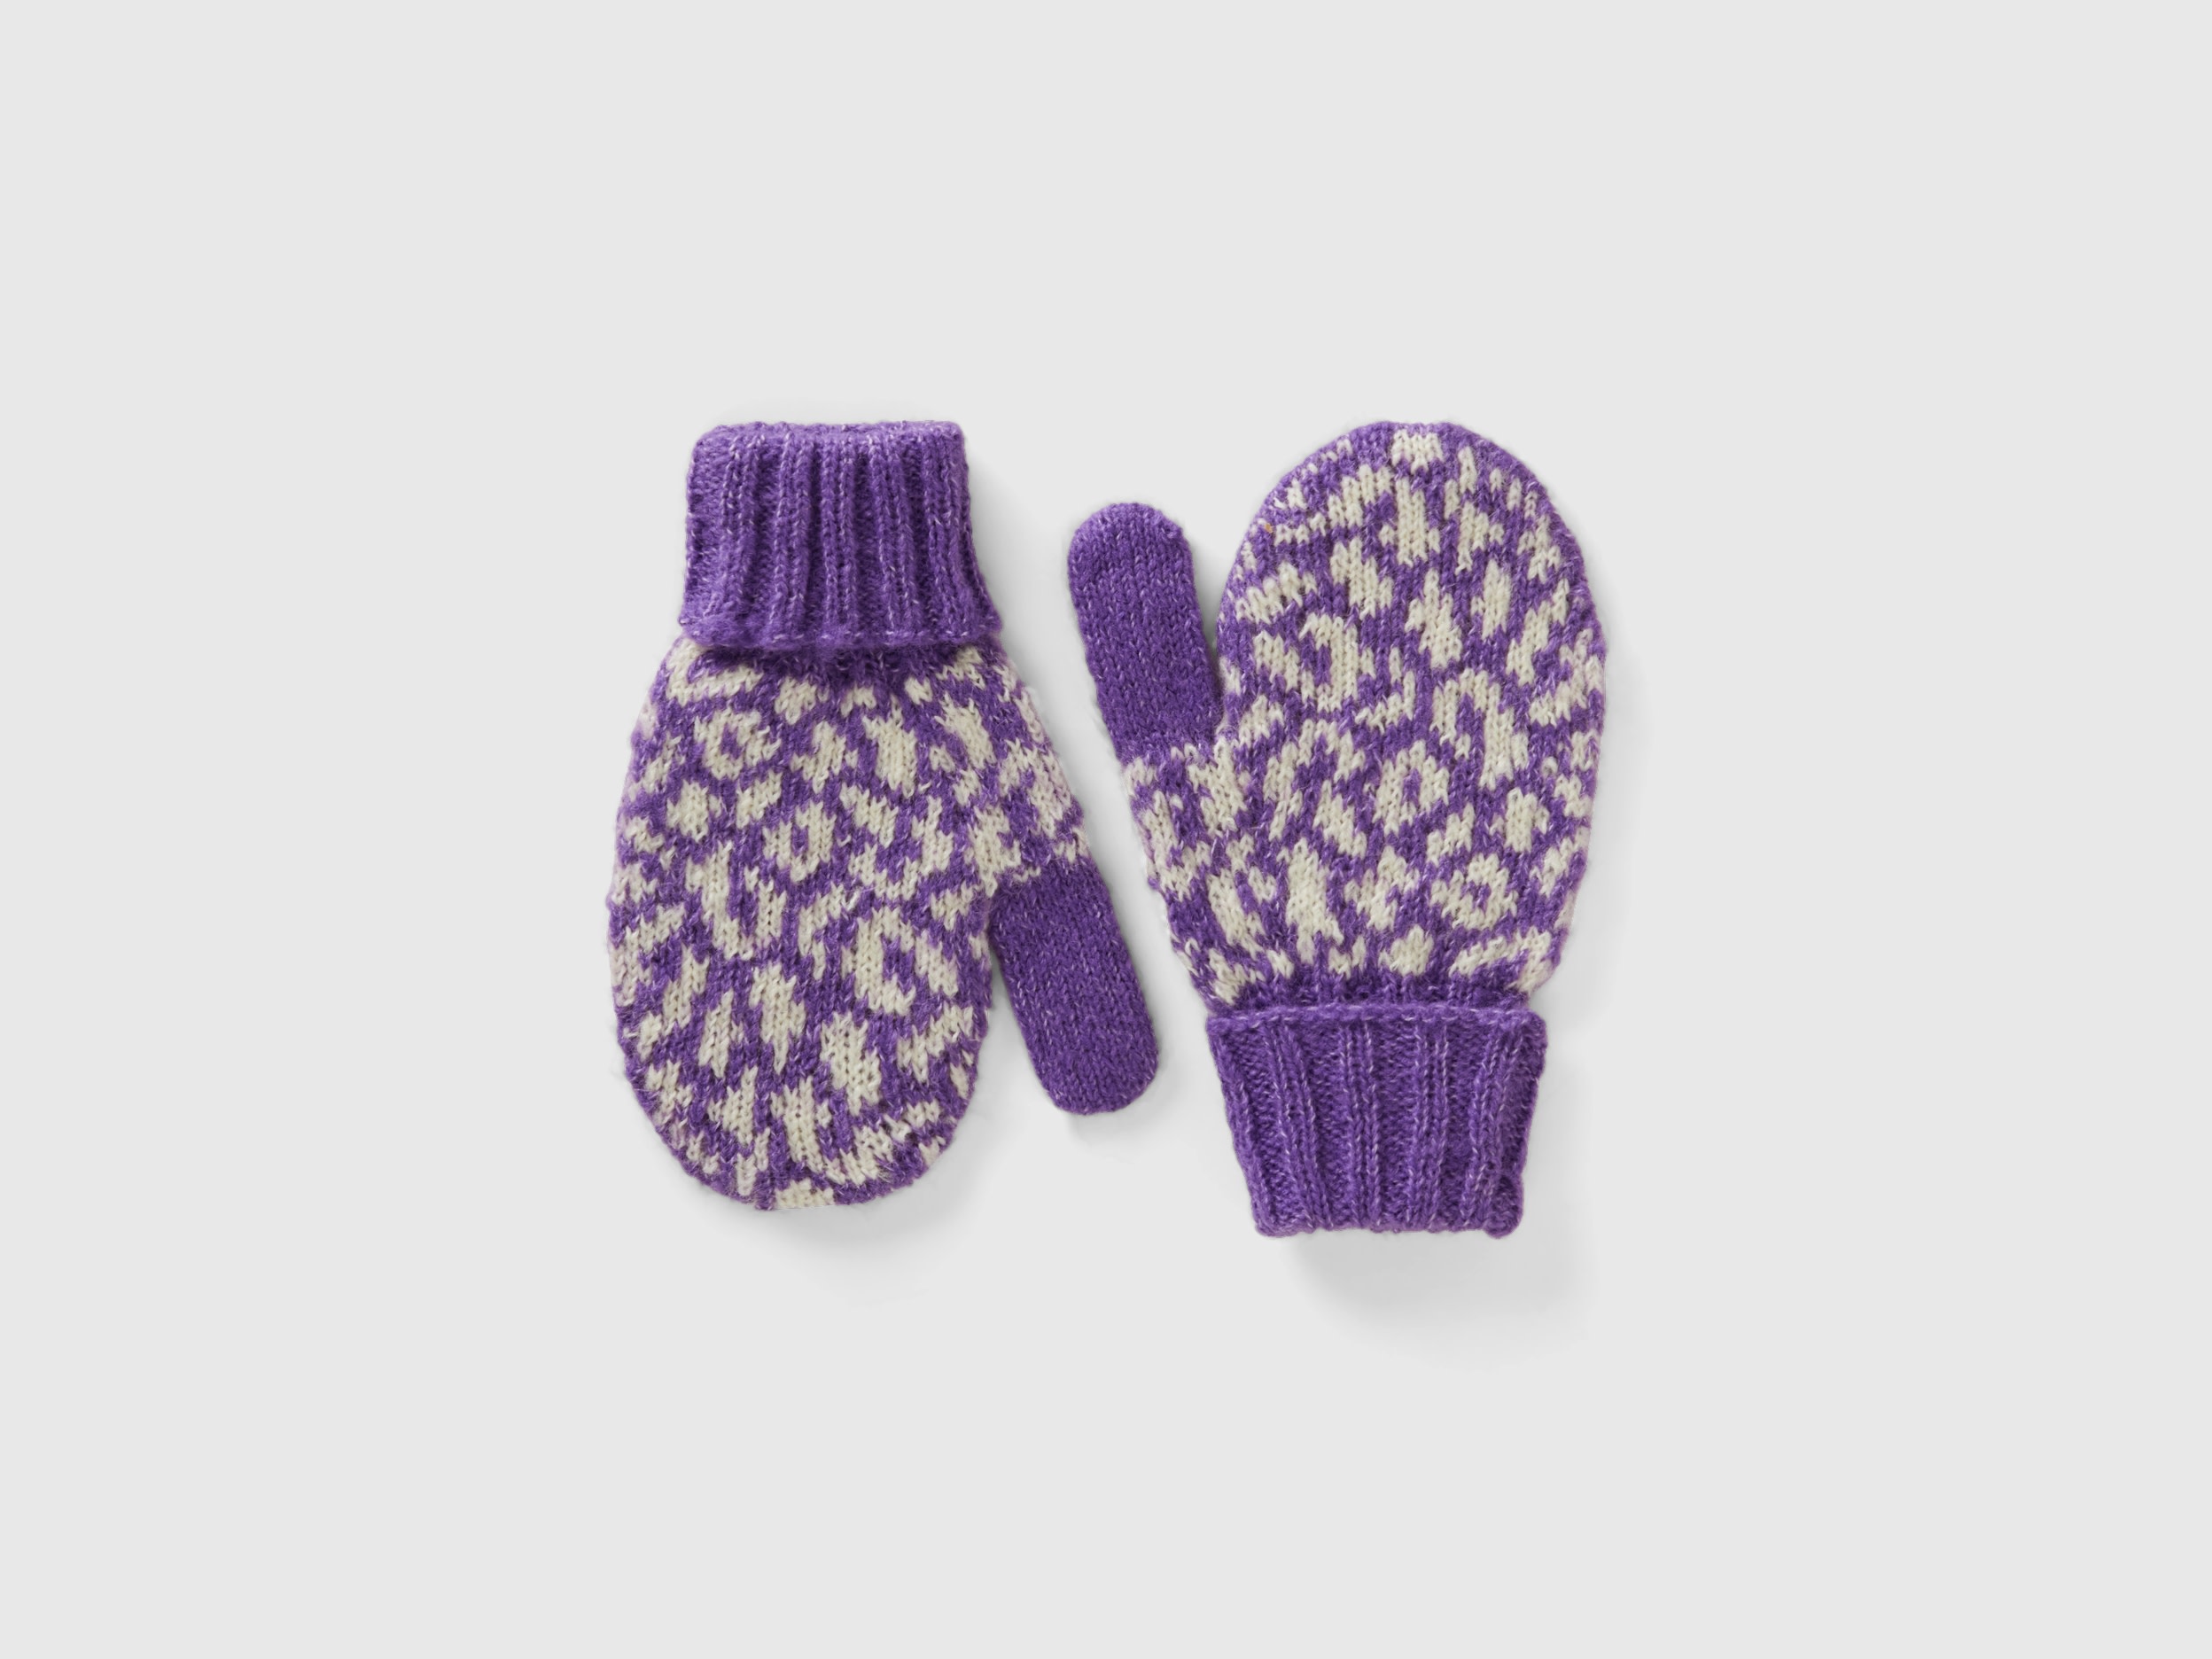 Benetton, Animal Print Mittens In Wool Blend, size 1-3, Multi-color, Kids